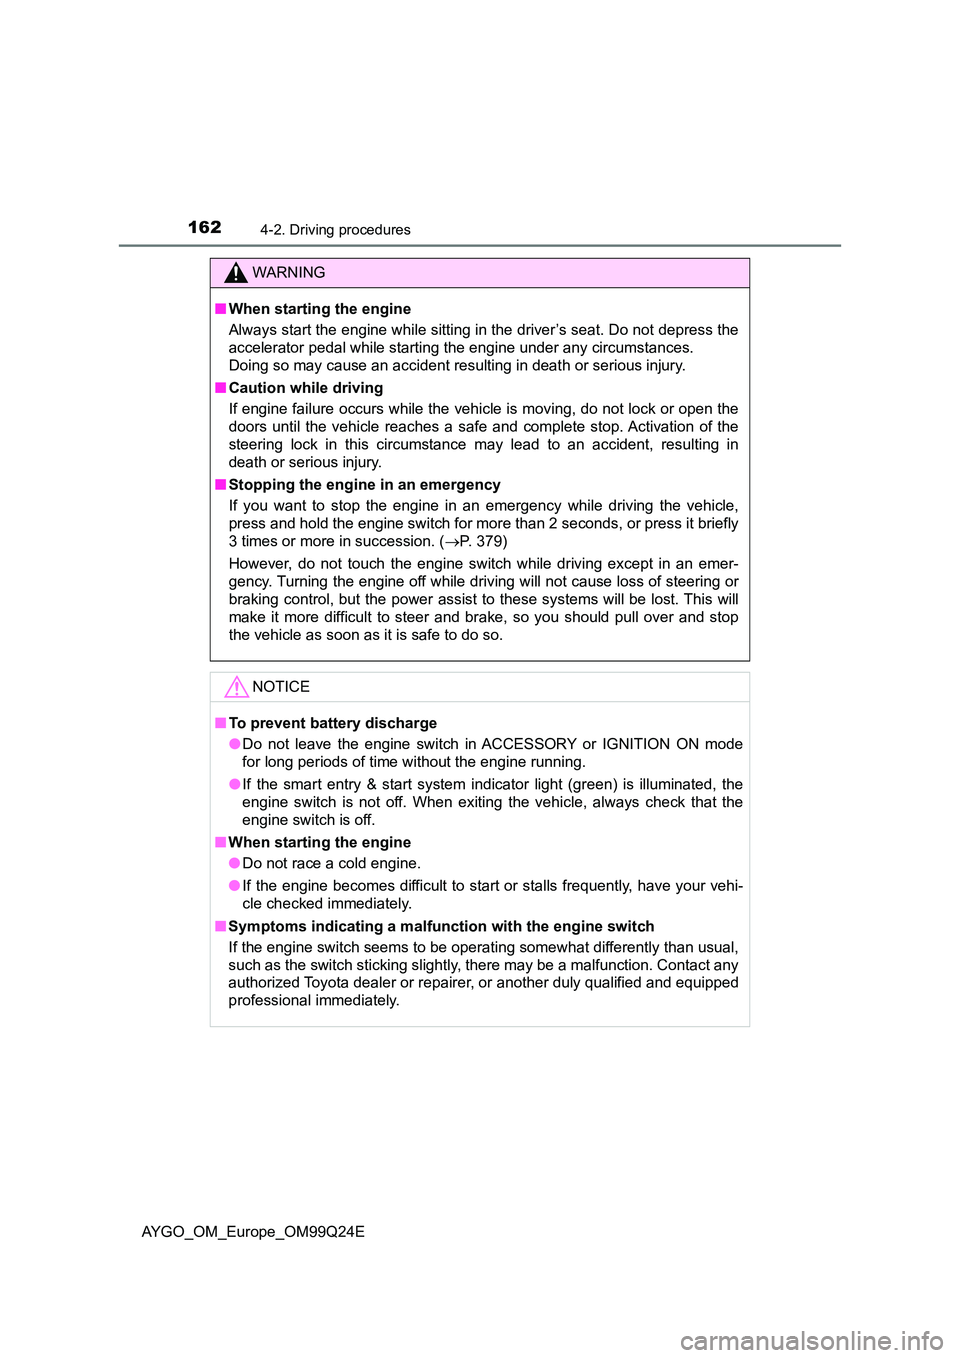 TOYOTA AYGO 2017  Owners Manual (in English) 1624-2. Driving procedures
AYGO_OM_Europe_OM99Q24E
WARNING
■When starting the engine 
Always start the engine while sitting in the driver’s seat. Do not depress the 
accelerator pedal while starti